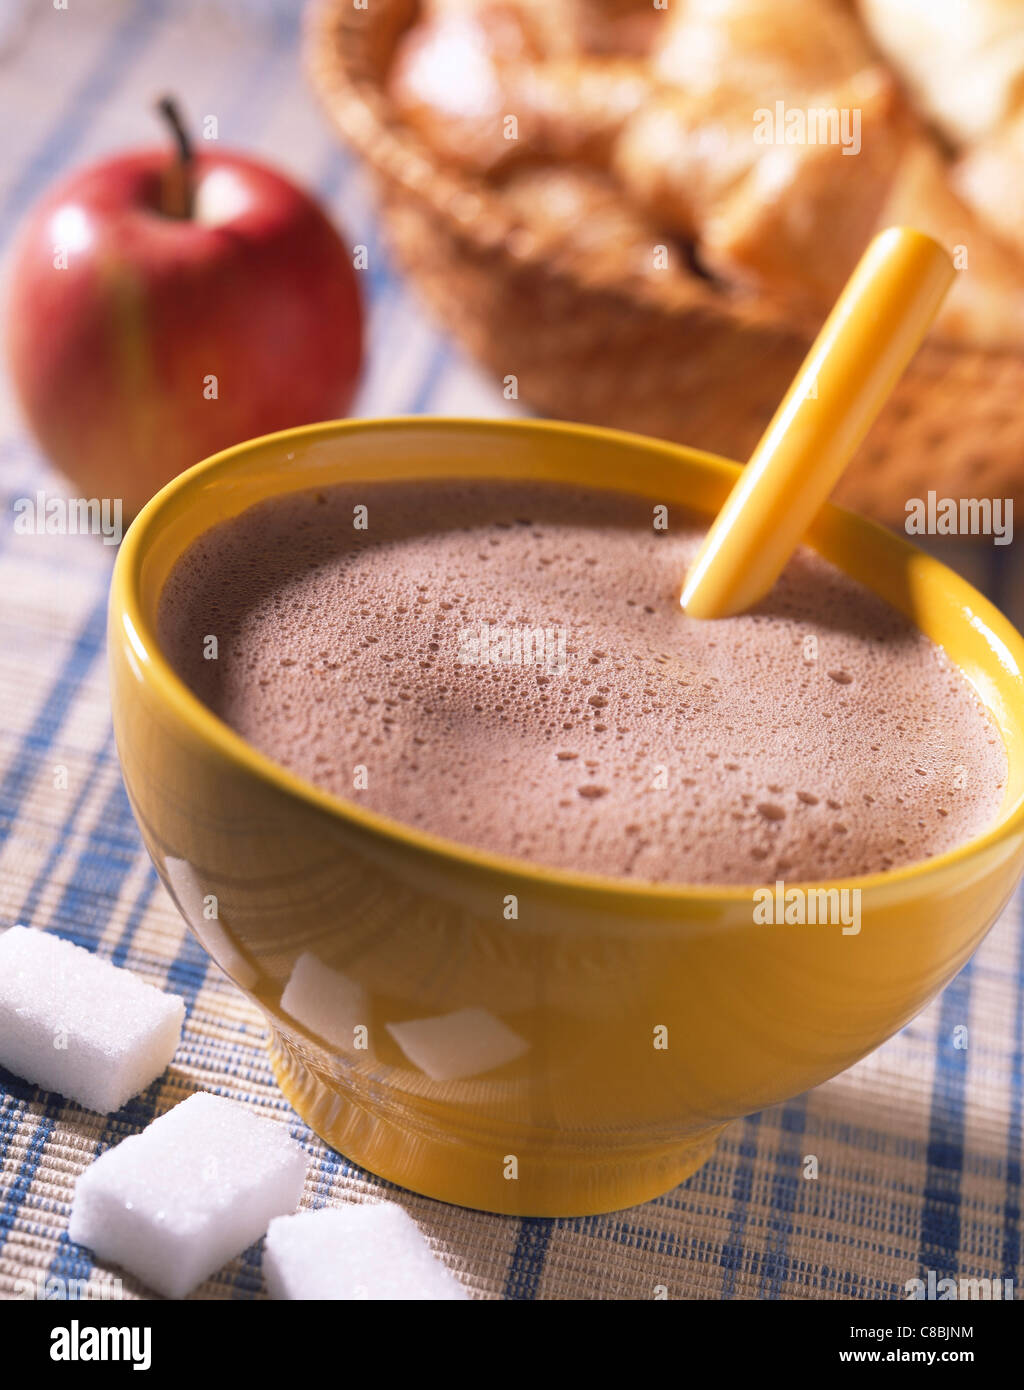 bowl of hot chocolate for breakfast Stock Photo